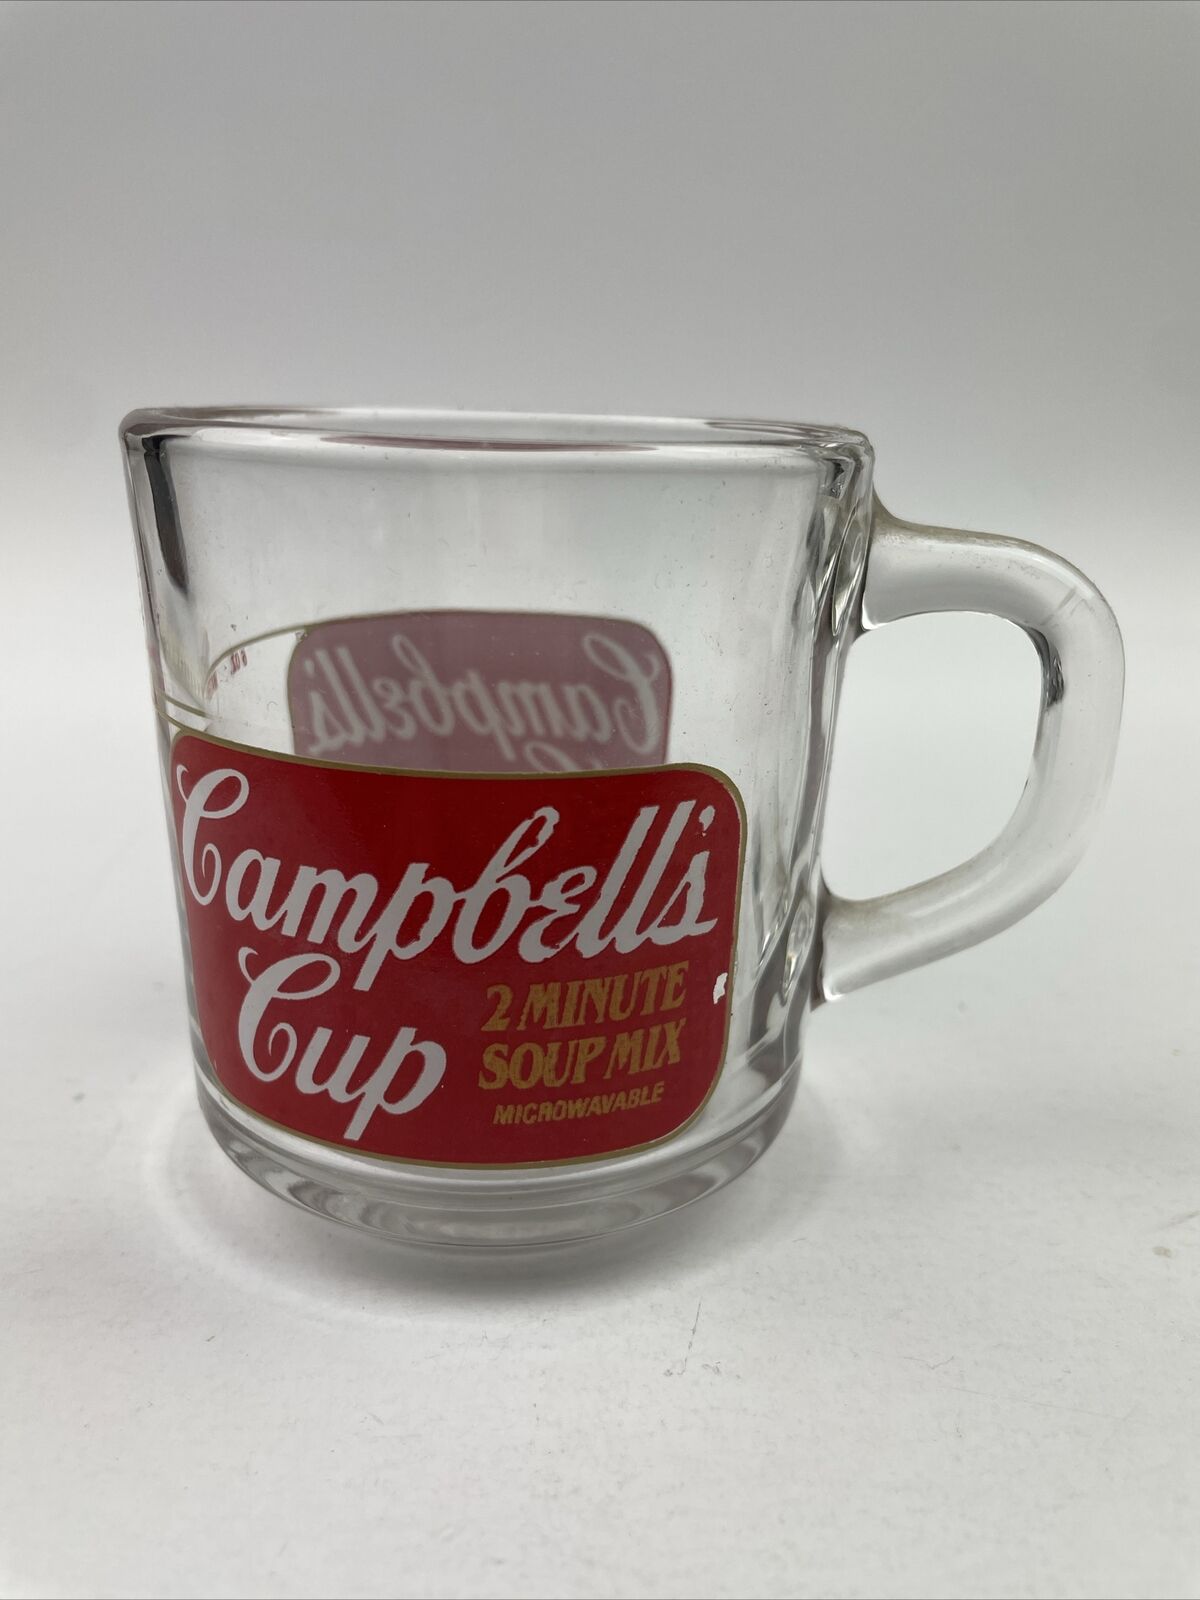 Campbell’s Cup 2 Minute Soup Mix Clear Glass Mug Vintage 70s 80s